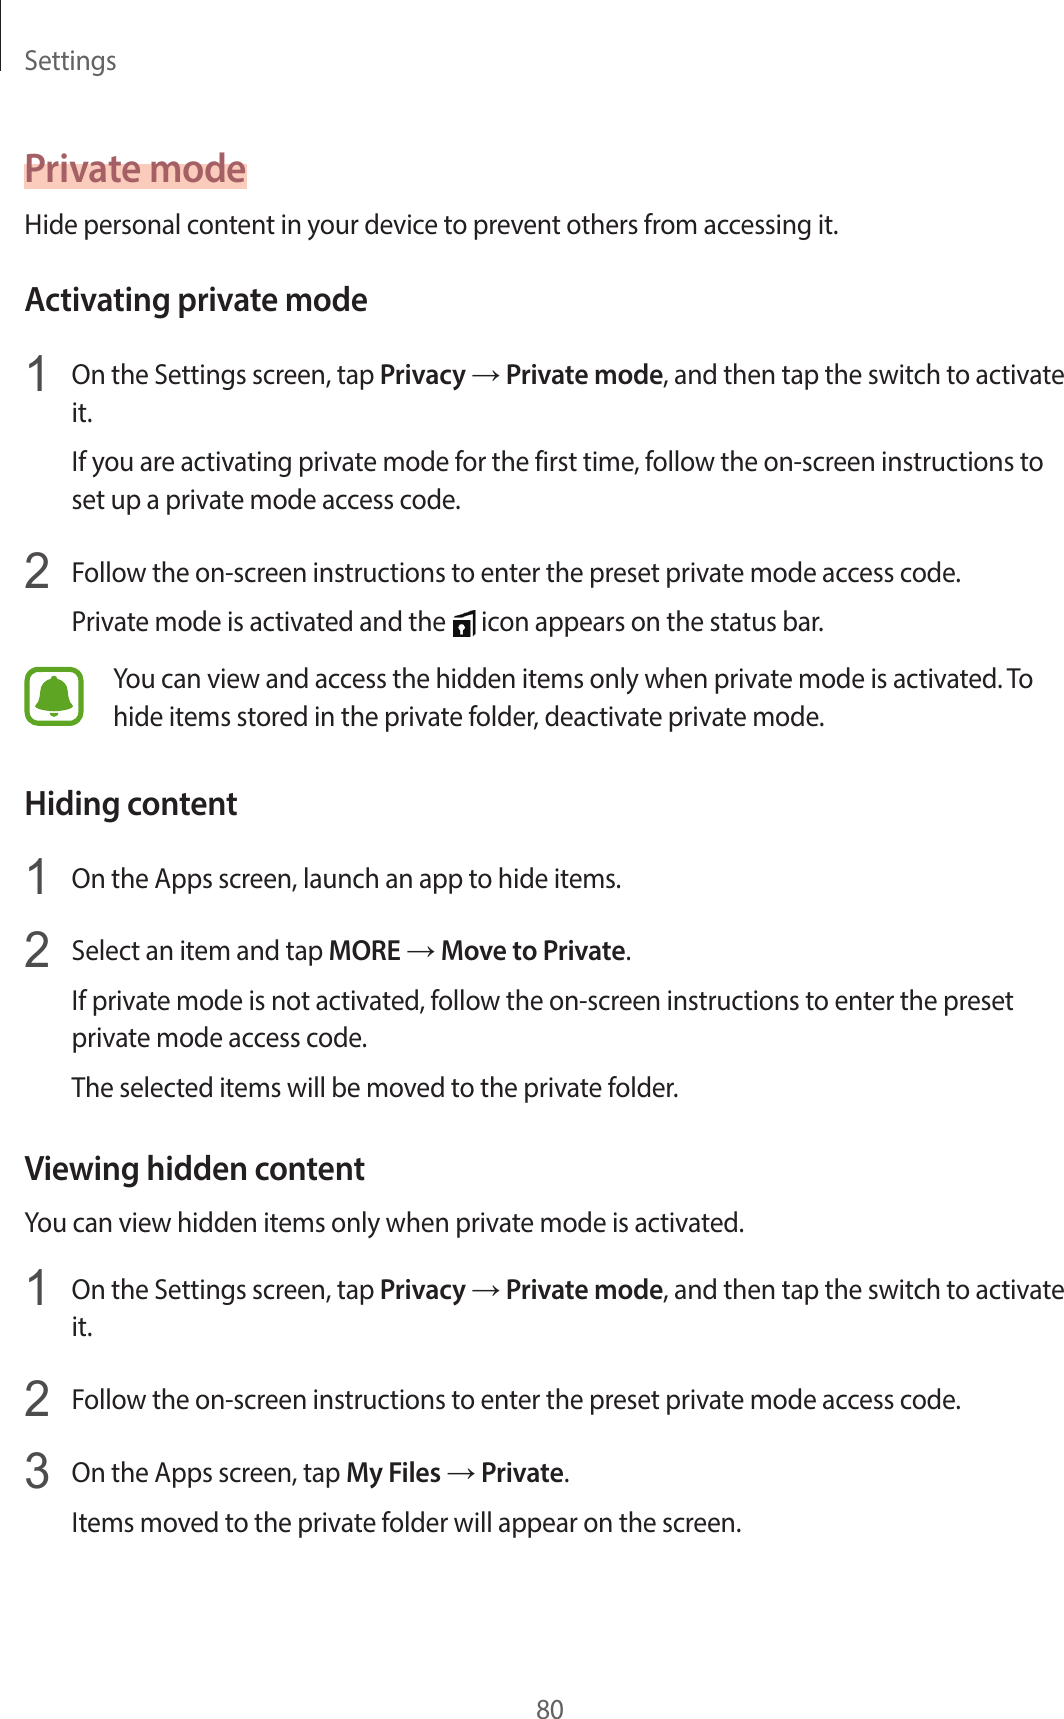 Settings80Private modeHide personal content in your device to prevent others from accessing it.Activating private mode1  On the Settings screen, tap Privacy → Private mode, and then tap the switch to activate it.If you are activating private mode for the first time, follow the on-screen instructions to set up a private mode access code.2  Follow the on-screen instructions to enter the preset private mode access code.Private mode is activated and the   icon appears on the status bar.You can view and access the hidden items only when private mode is activated. To hide items stored in the private folder, deactivate private mode.Hiding content1  On the Apps screen, launch an app to hide items.2  Select an item and tap MORE → Move to Private.If private mode is not activated, follow the on-screen instructions to enter the preset private mode access code.The selected items will be moved to the private folder.Viewing hidden contentYou can view hidden items only when private mode is activated.1  On the Settings screen, tap Privacy → Private mode, and then tap the switch to activate it.2  Follow the on-screen instructions to enter the preset private mode access code.3  On the Apps screen, tap My Files → Private.Items moved to the private folder will appear on the screen.